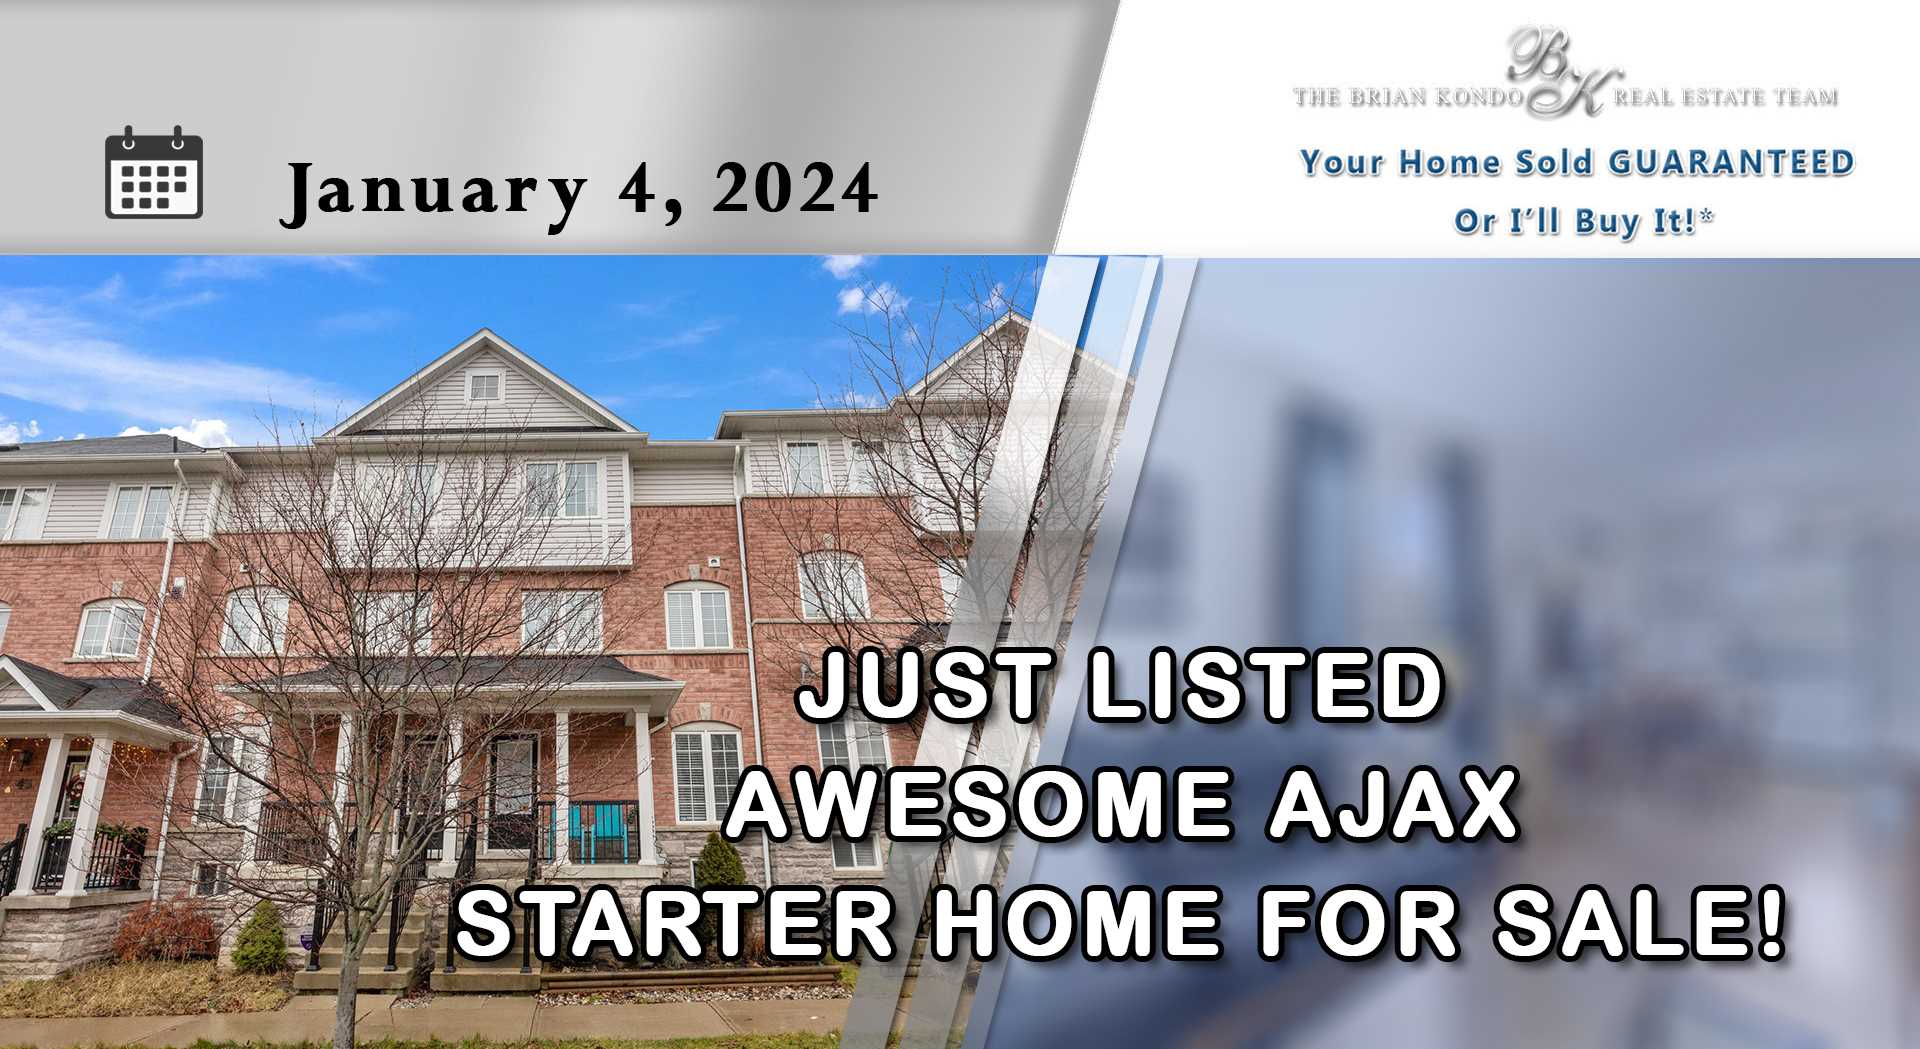 JUST LISTED AWESOME AJAX STARTER HOME FOR SALE!